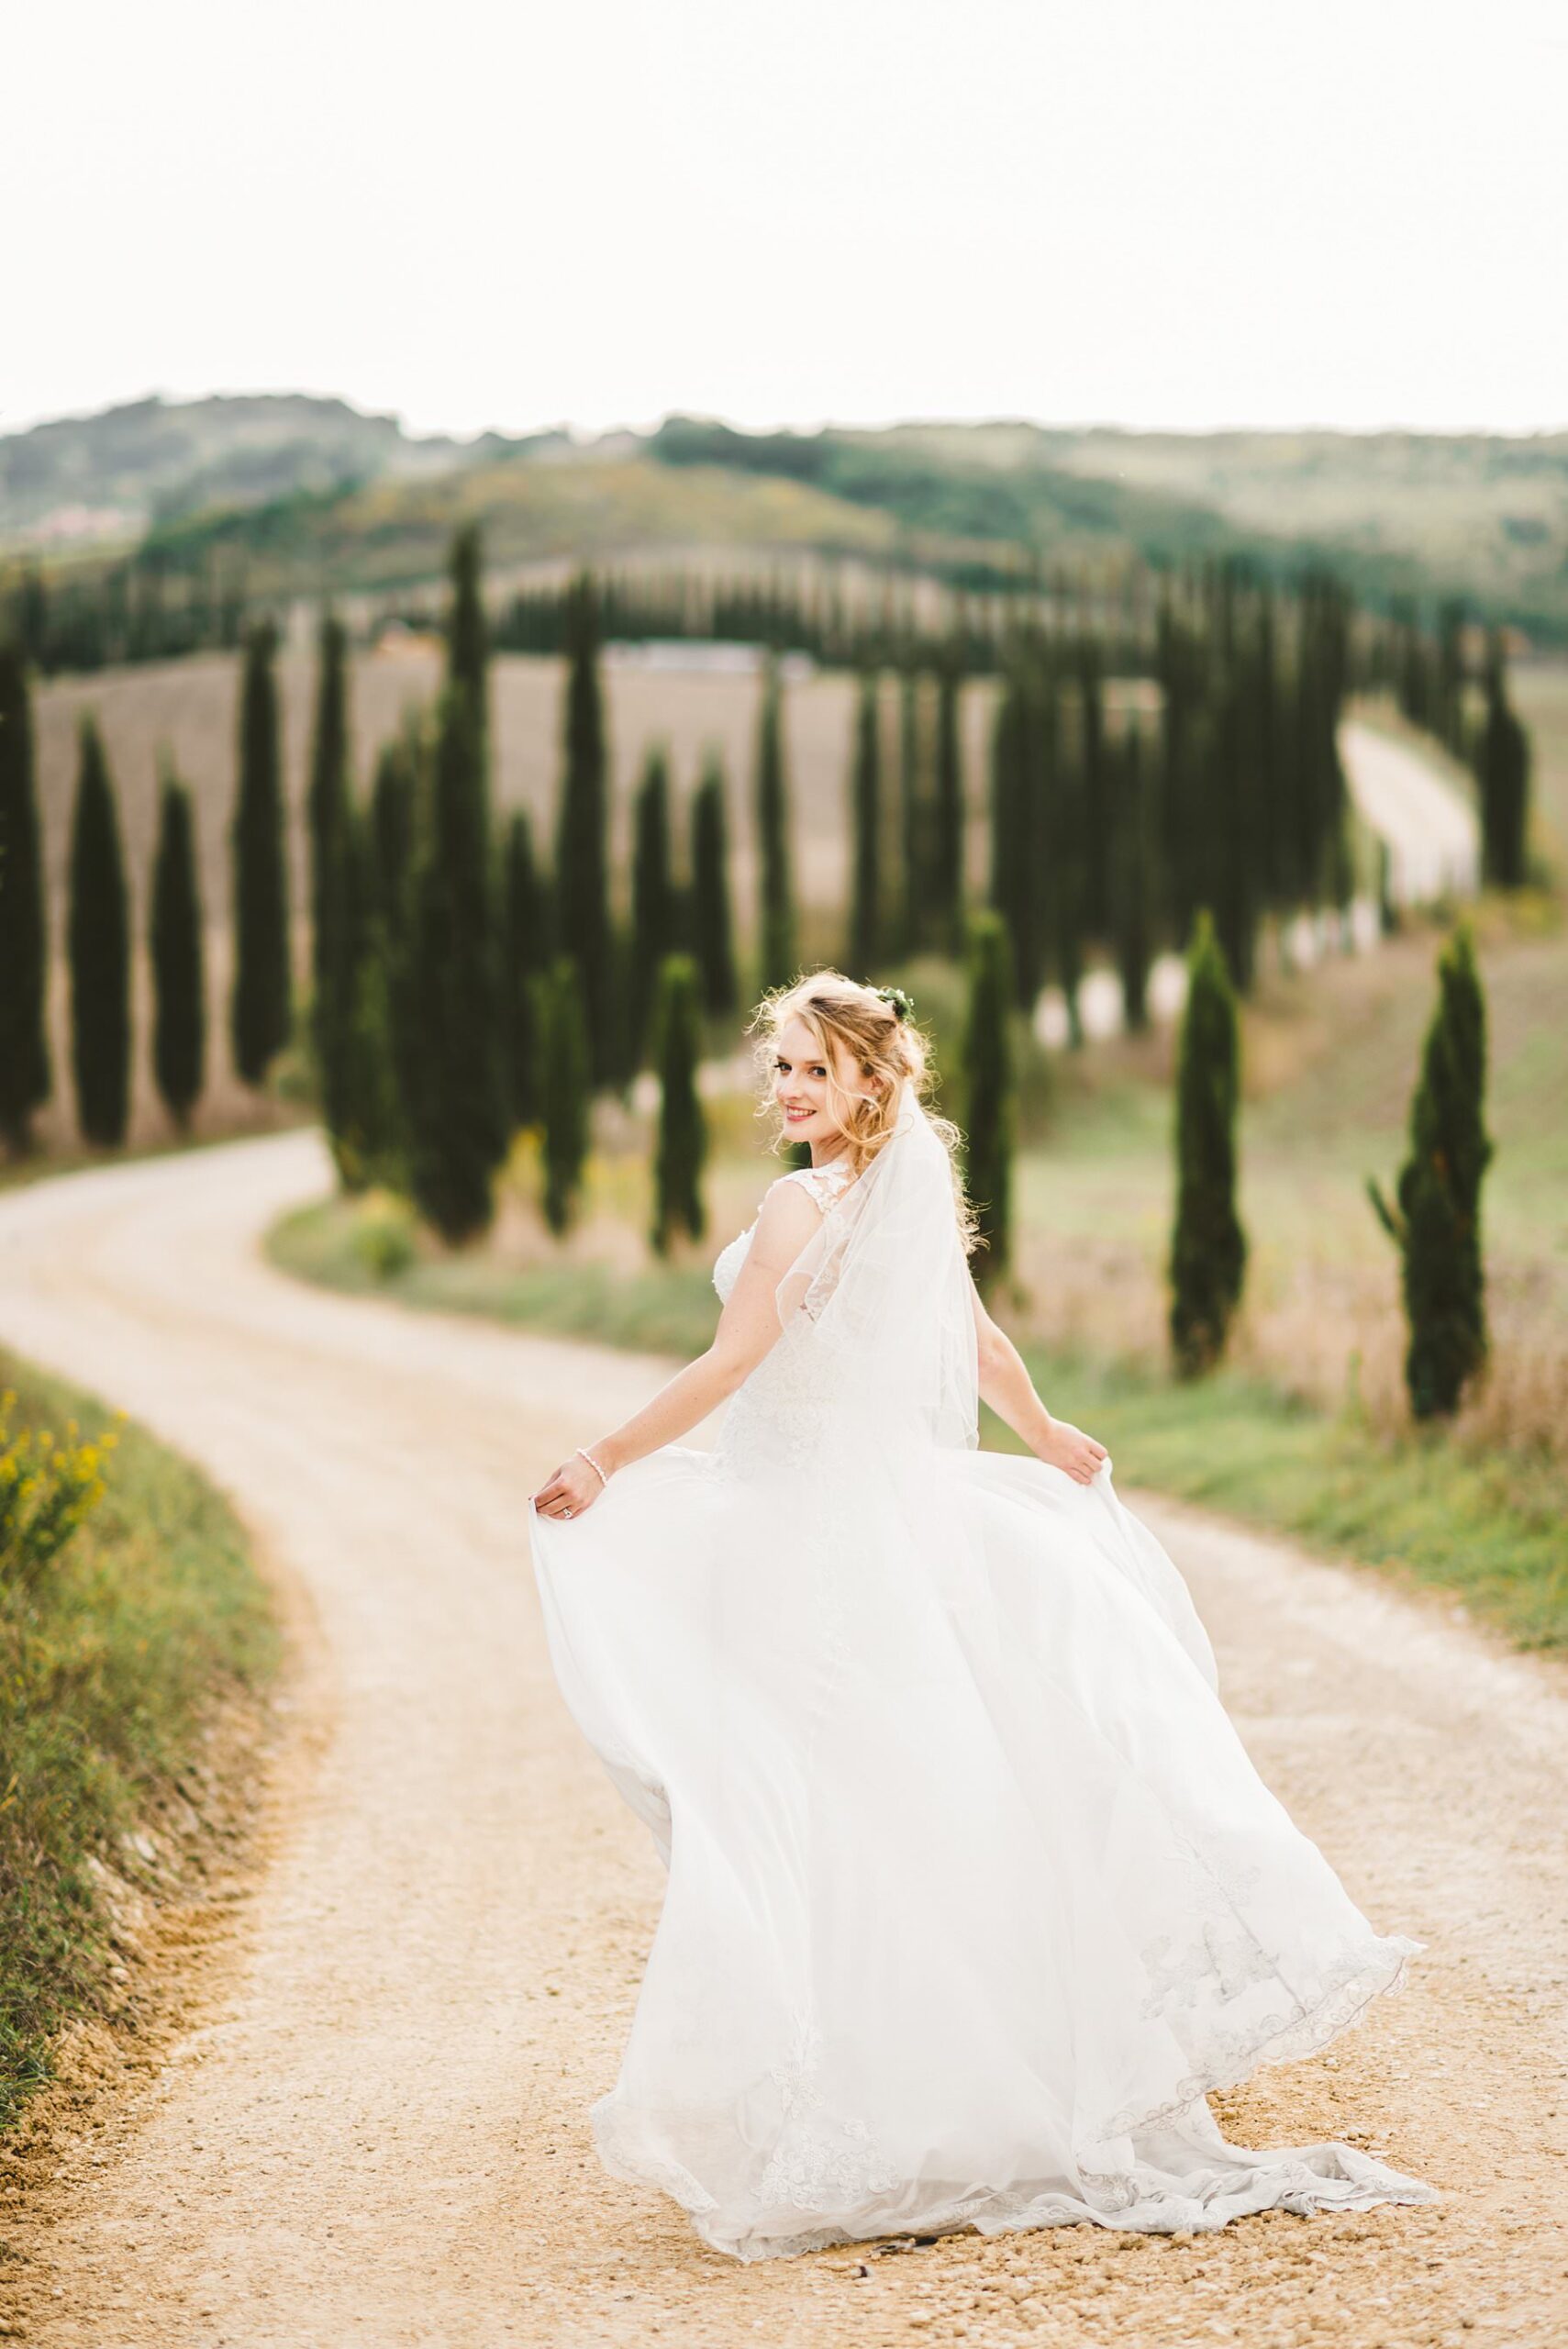 Destination elopement wedding in Tuscany. Lovely and elegant bride in Justin Alexander gown during a walk tour in the most iconic, evocative and stunning countryside views